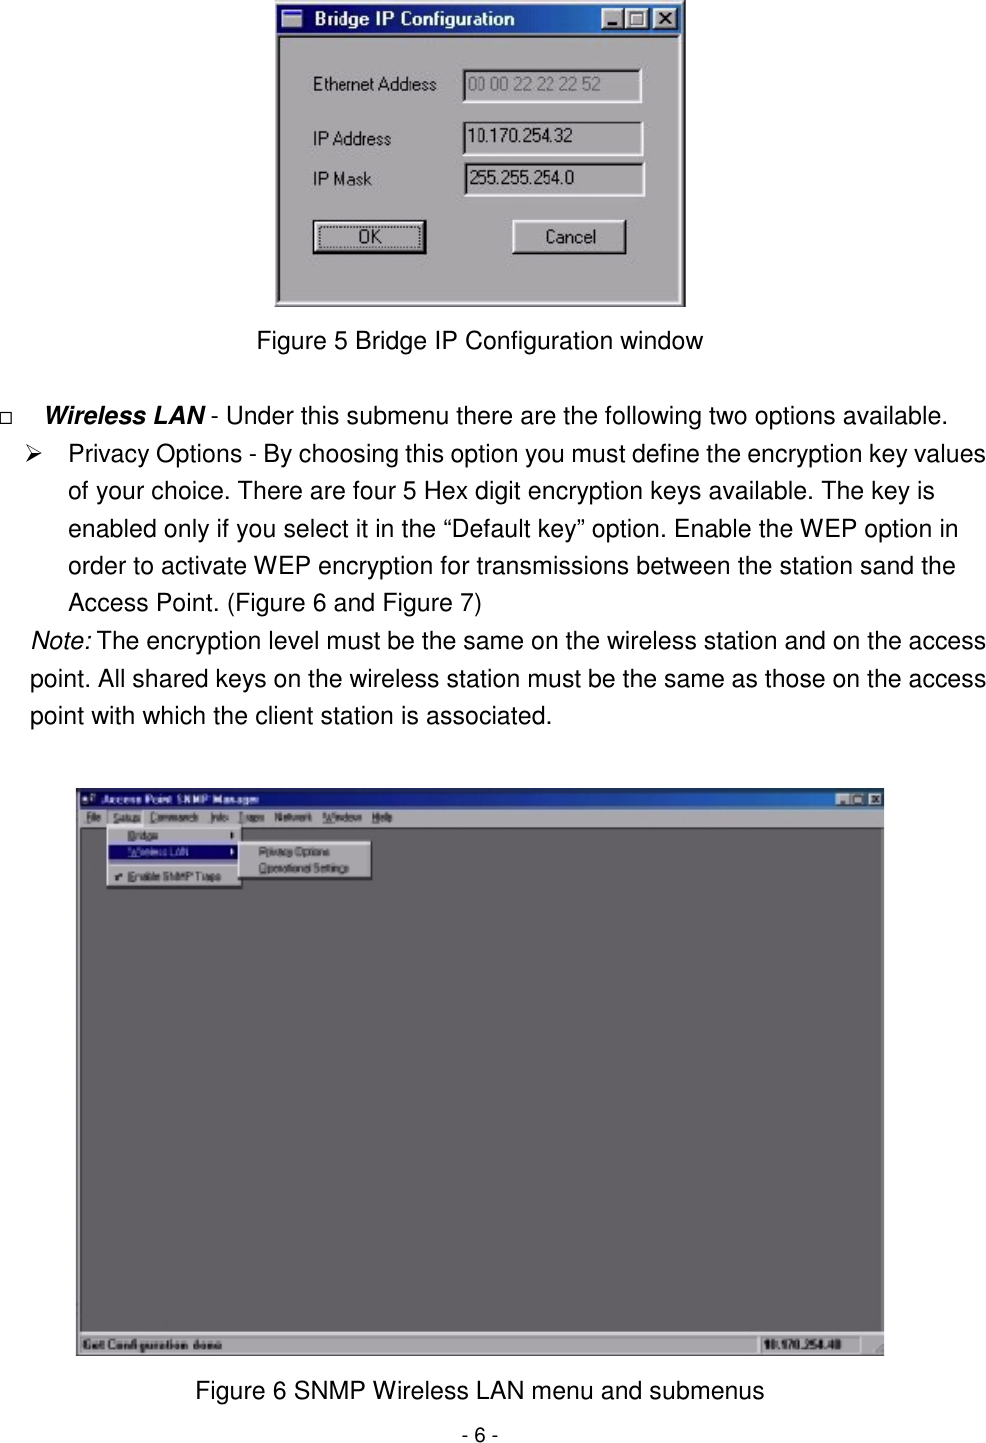 - 6 - Figure 5 Bridge IP Configuration window&quot; Wireless LAN - Under this submenu there are the following two options available.#  Privacy Options - By choosing this option you must define the encryption key valuesof your choice. There are four 5 Hex digit encryption keys available. The key isenabled only if you select it in the “Default key” option. Enable the WEP option inorder to activate WEP encryption for transmissions between the station sand theAccess Point. (Figure 6 and Figure 7)Note: The encryption level must be the same on the wireless station and on the accesspoint. All shared keys on the wireless station must be the same as those on the accesspoint with which the client station is associated.Figure 6 SNMP Wireless LAN menu and submenus